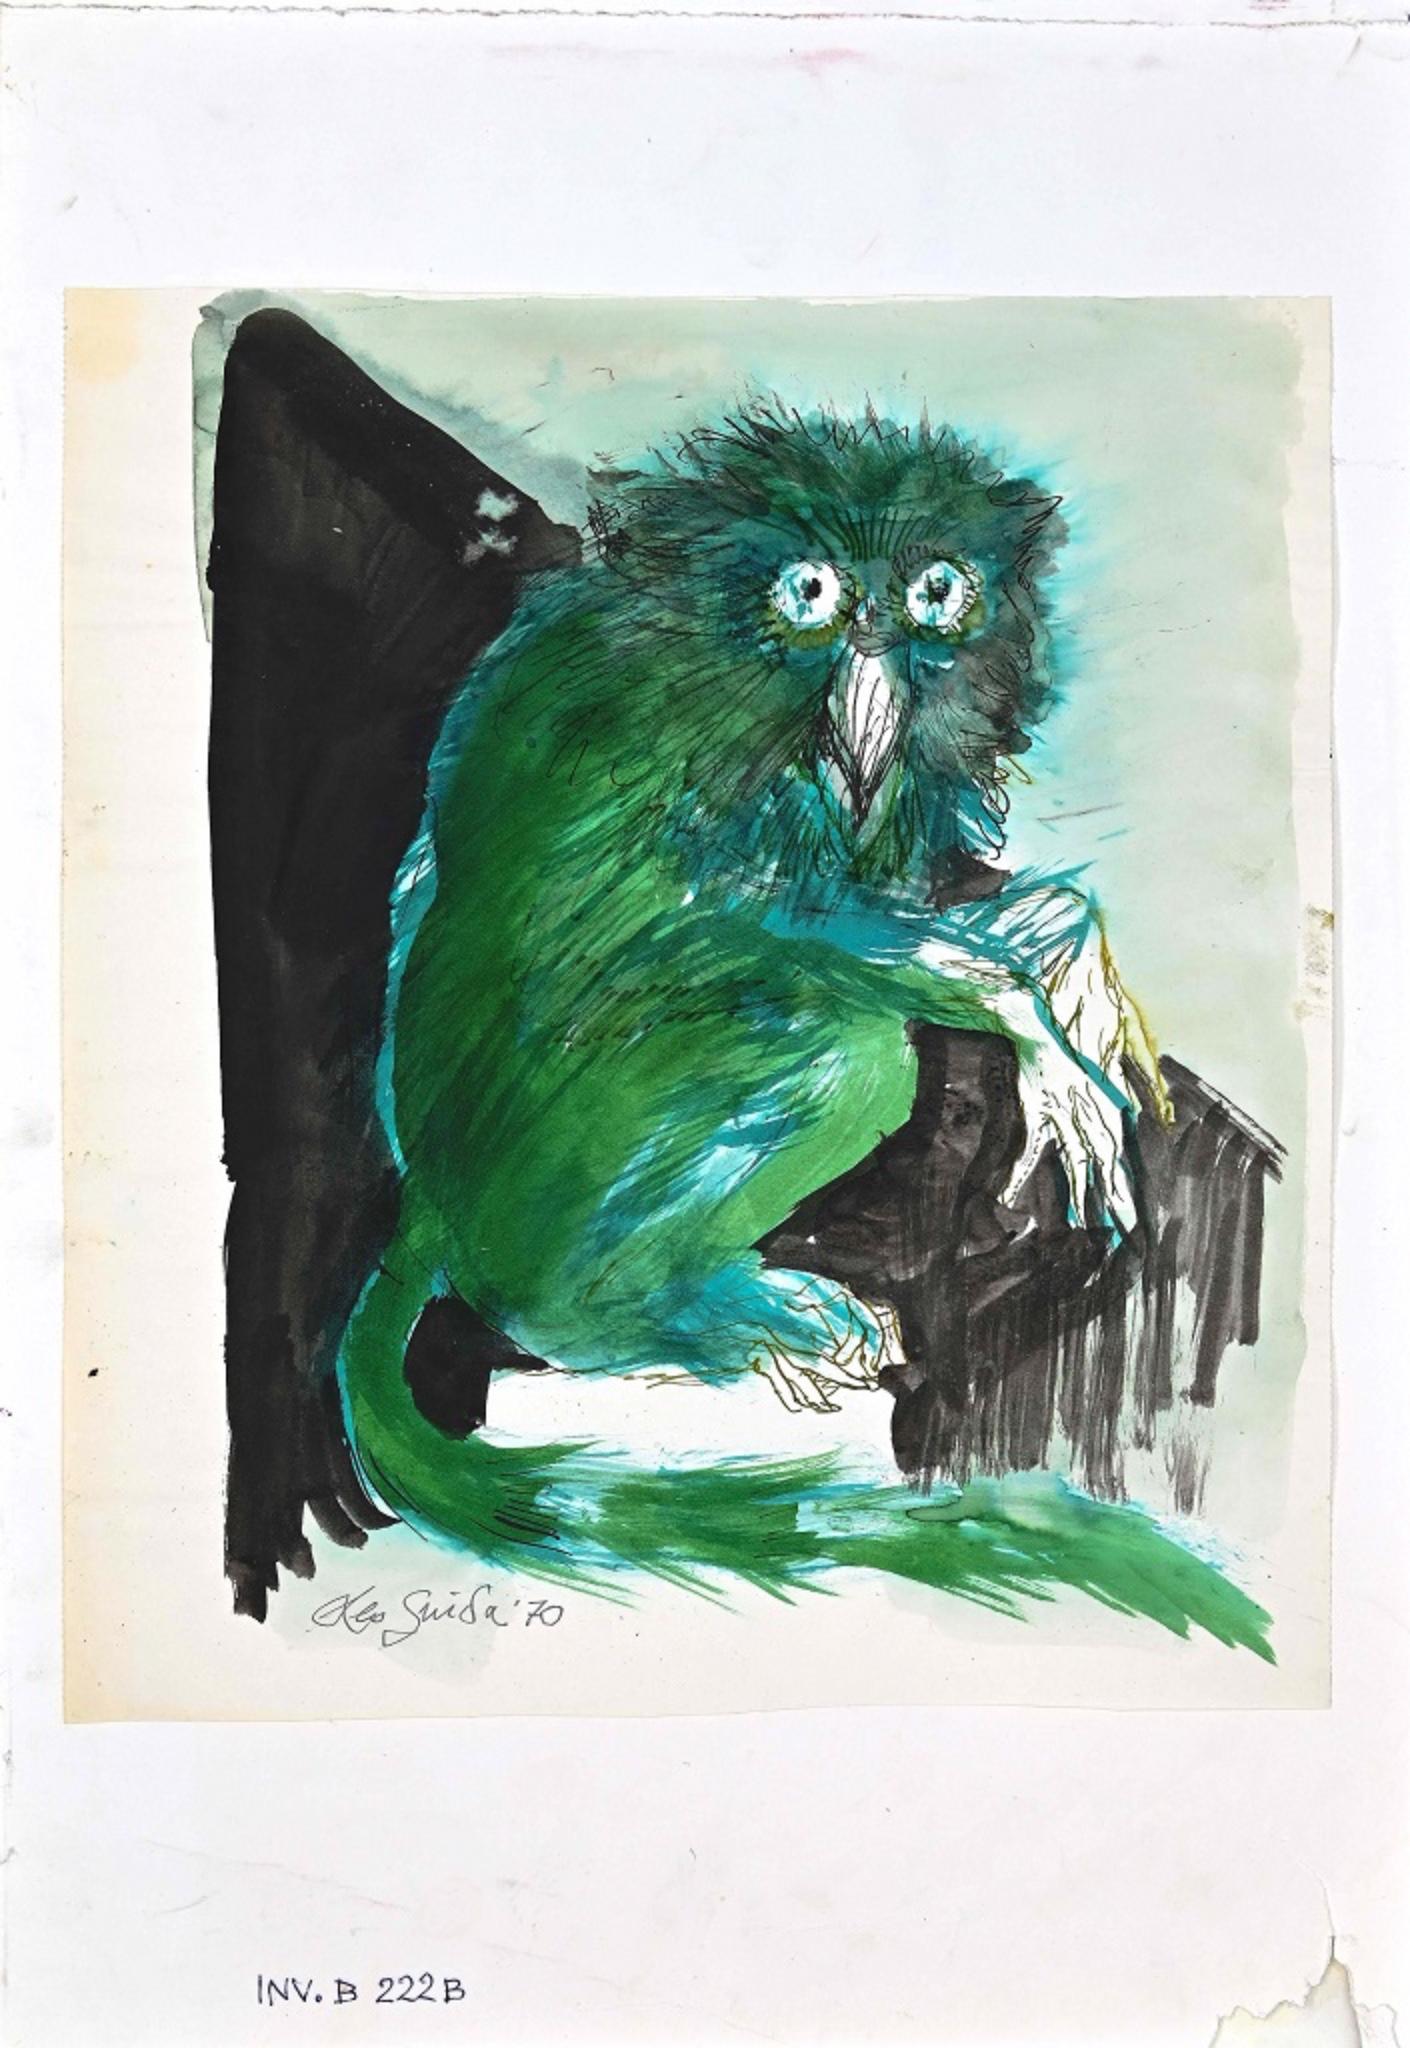 The Owl - Mixed Media Drawing by Leo Guida - 1970